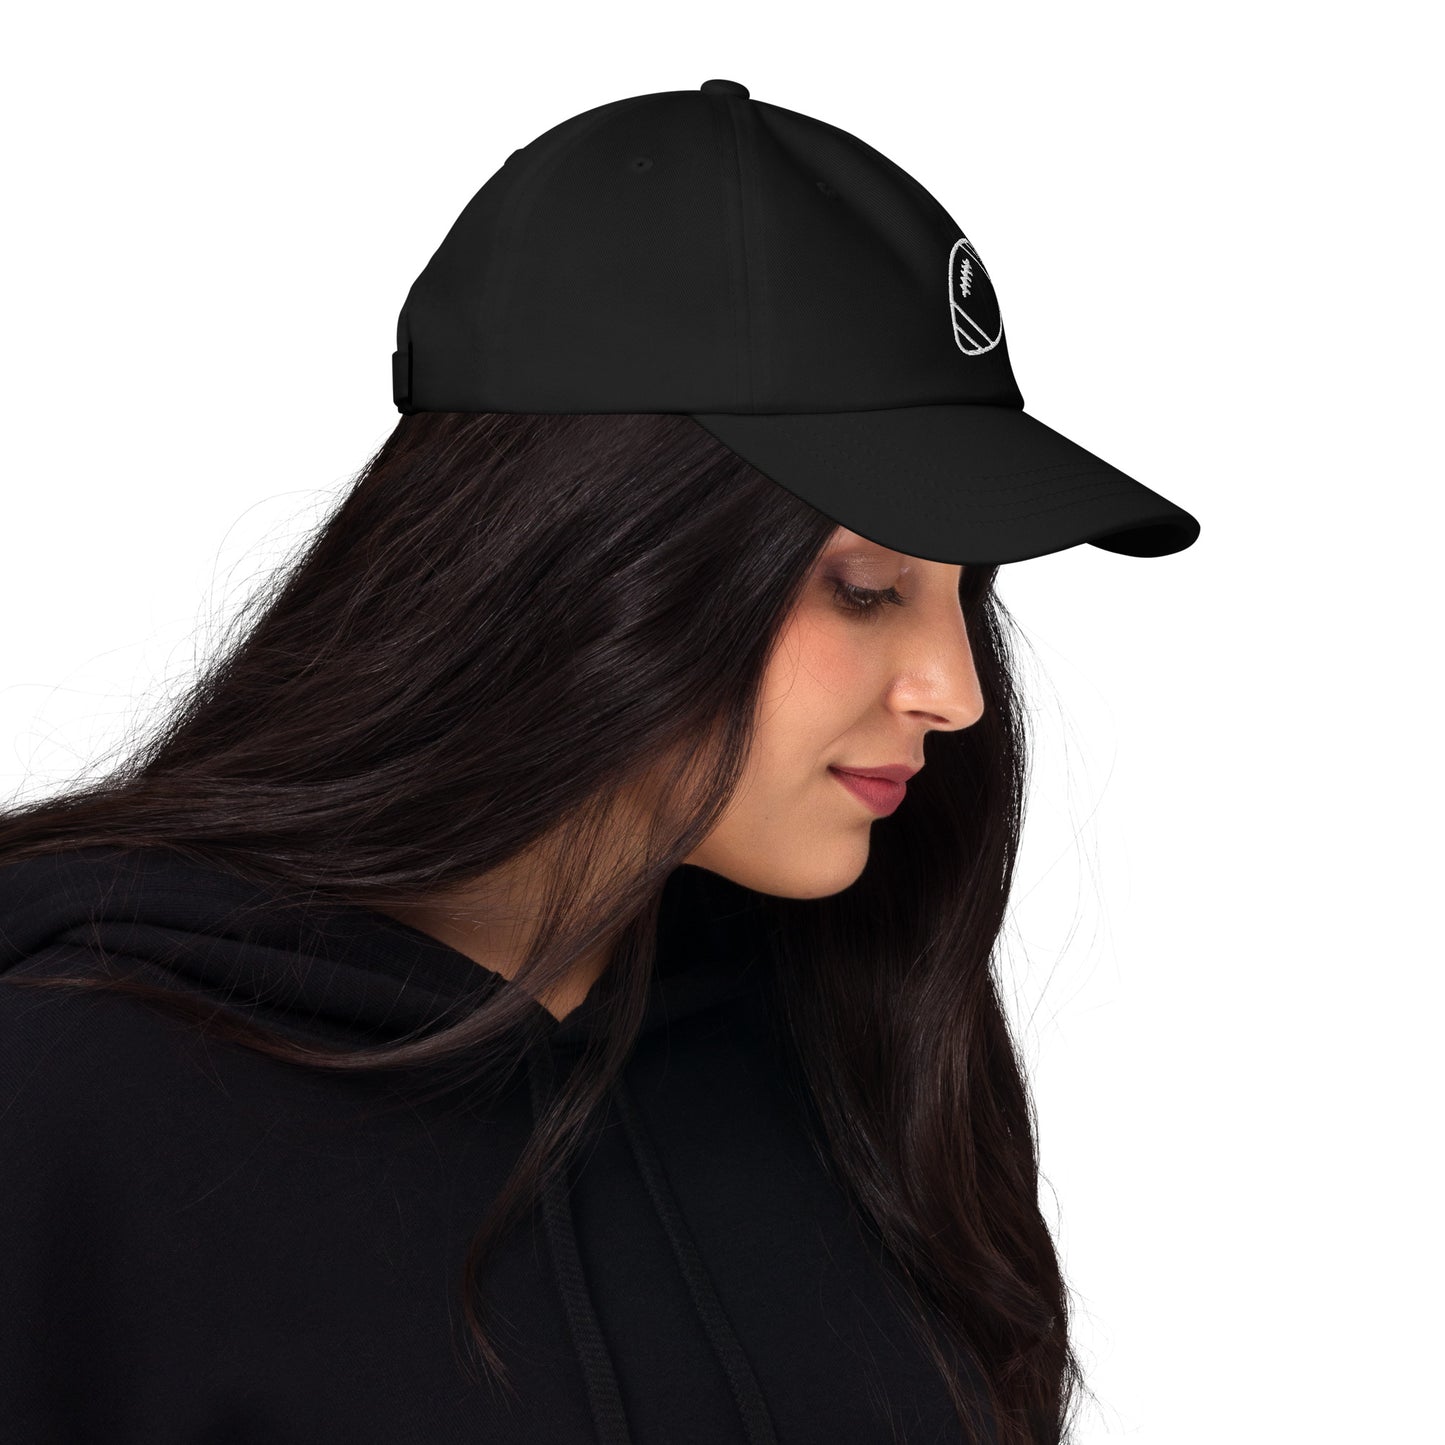 women with black baseball cap with football